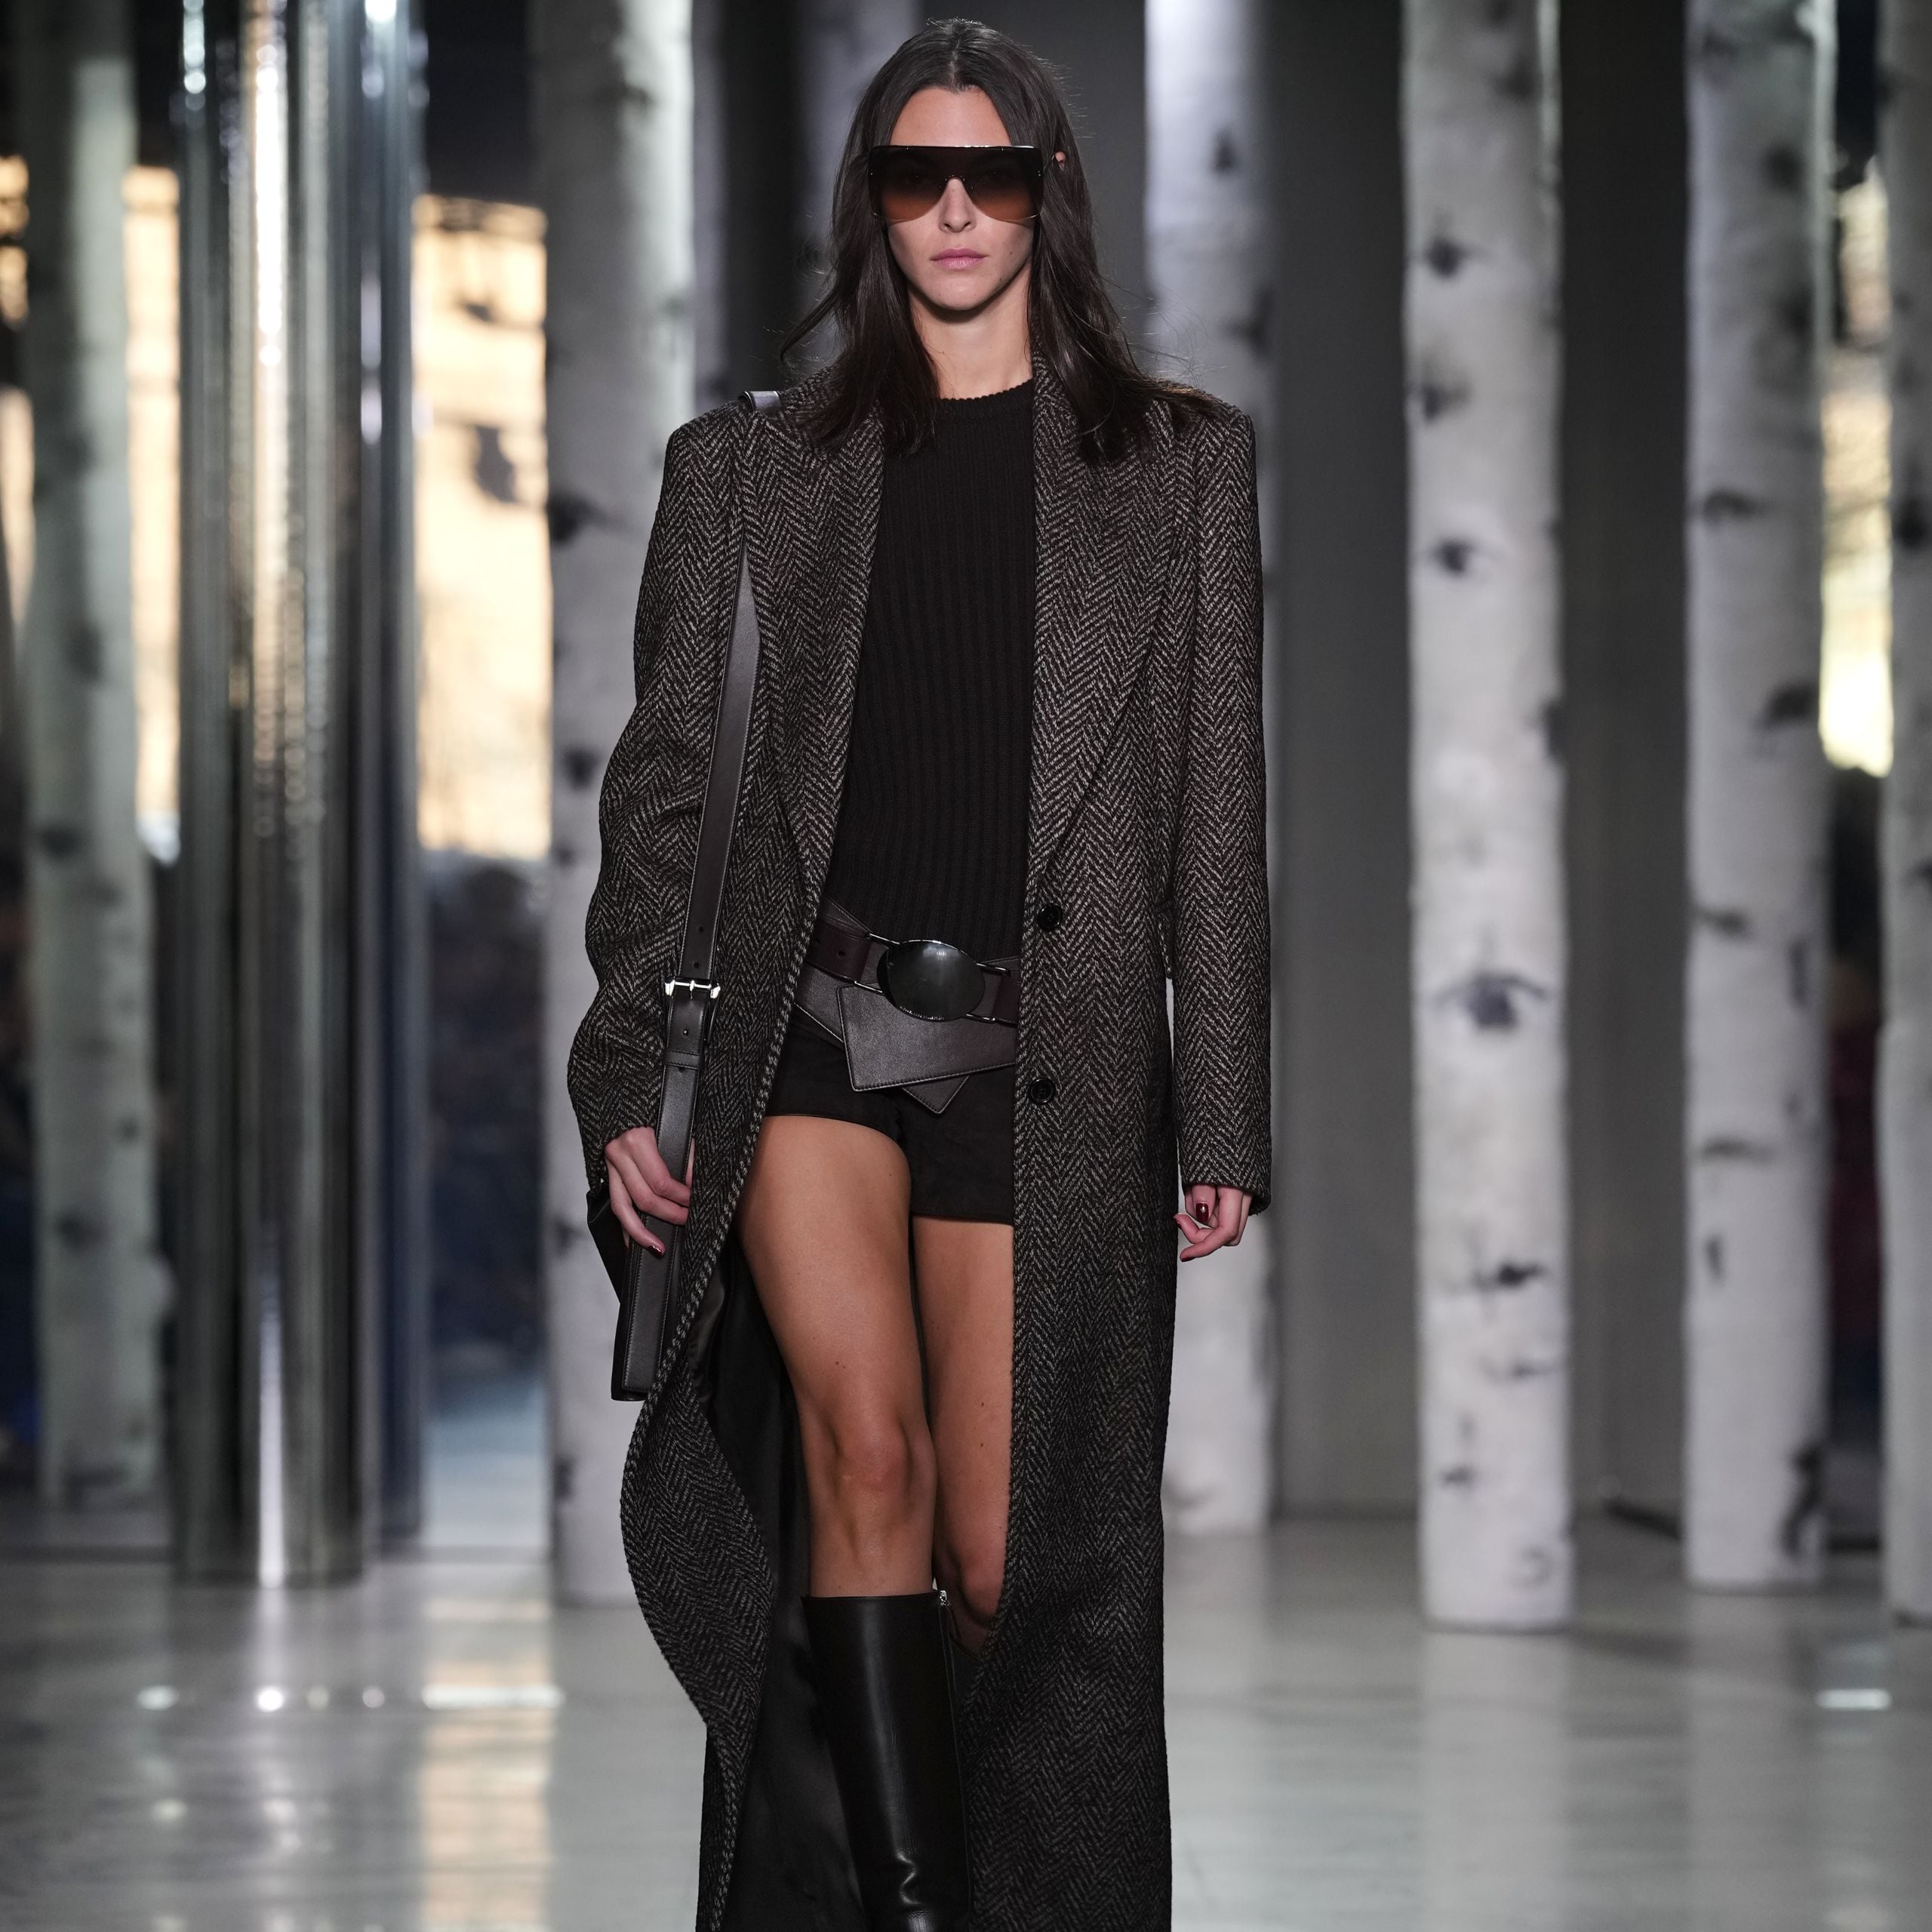 Michael Kors Collection Spring 2023 Ready-to-Wear Fashion Show